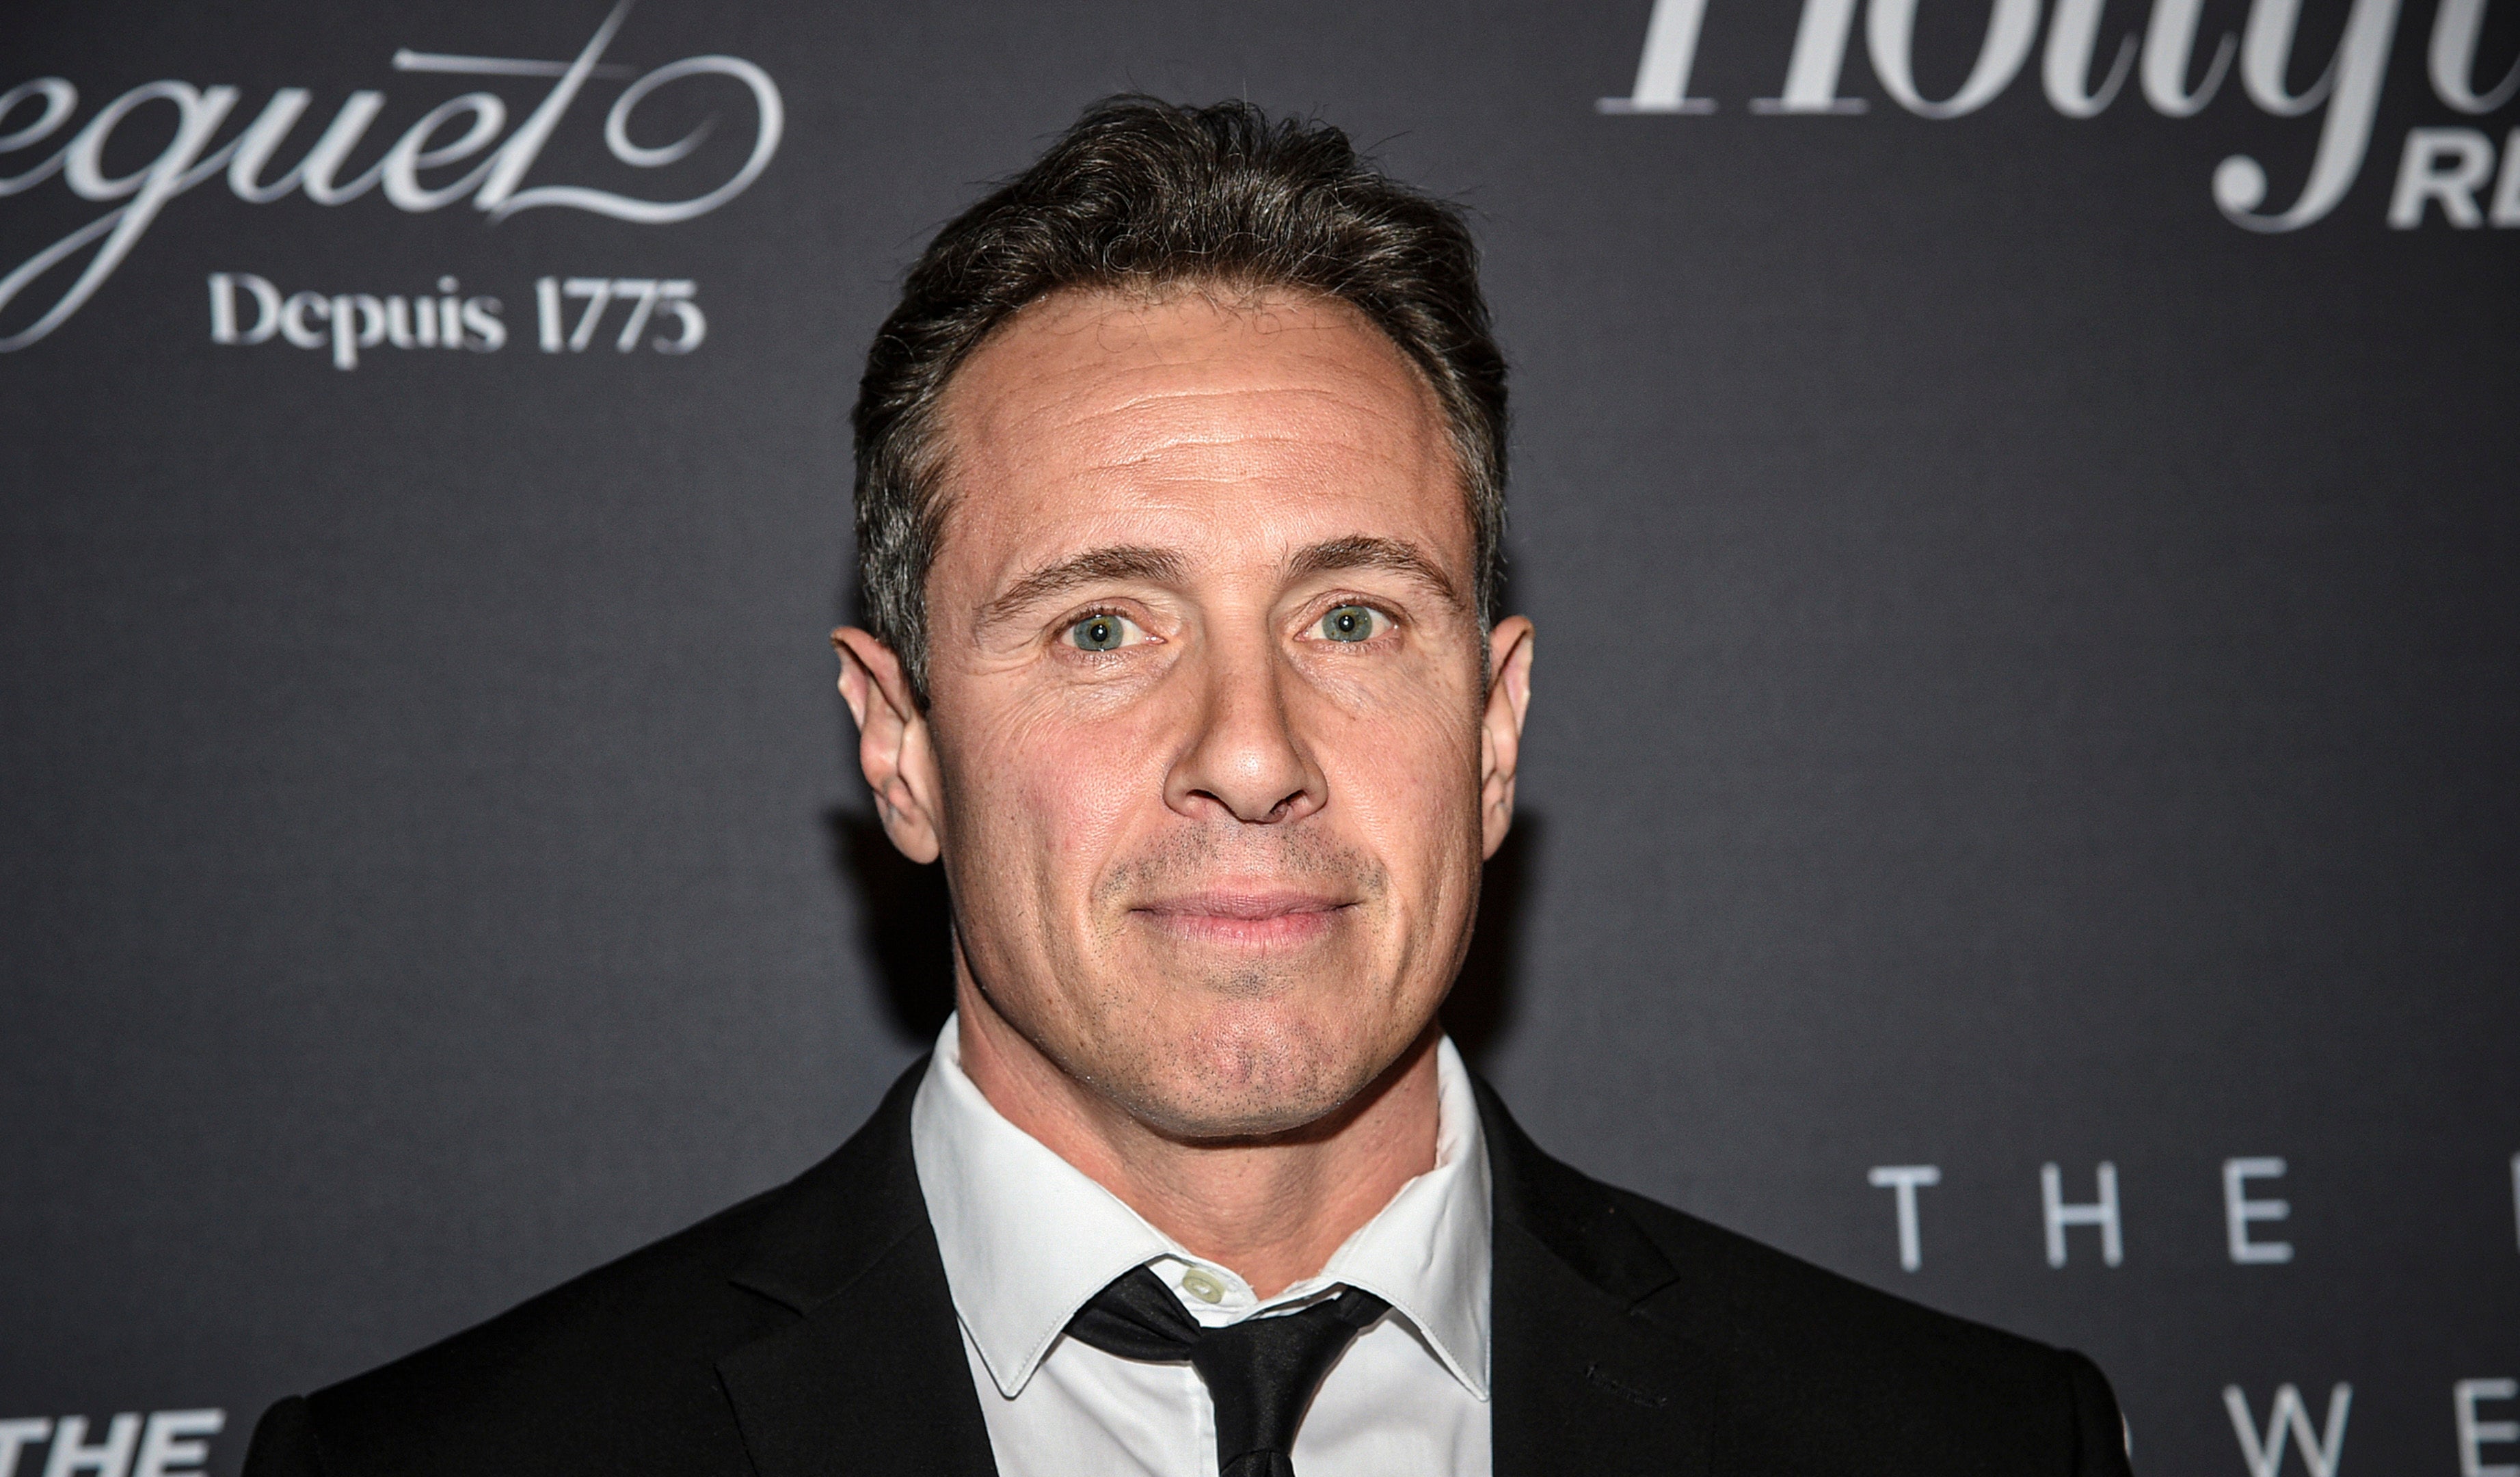 Chris Cuomo was fired in December from CNN after advising his brother about the sexual harassment allegations